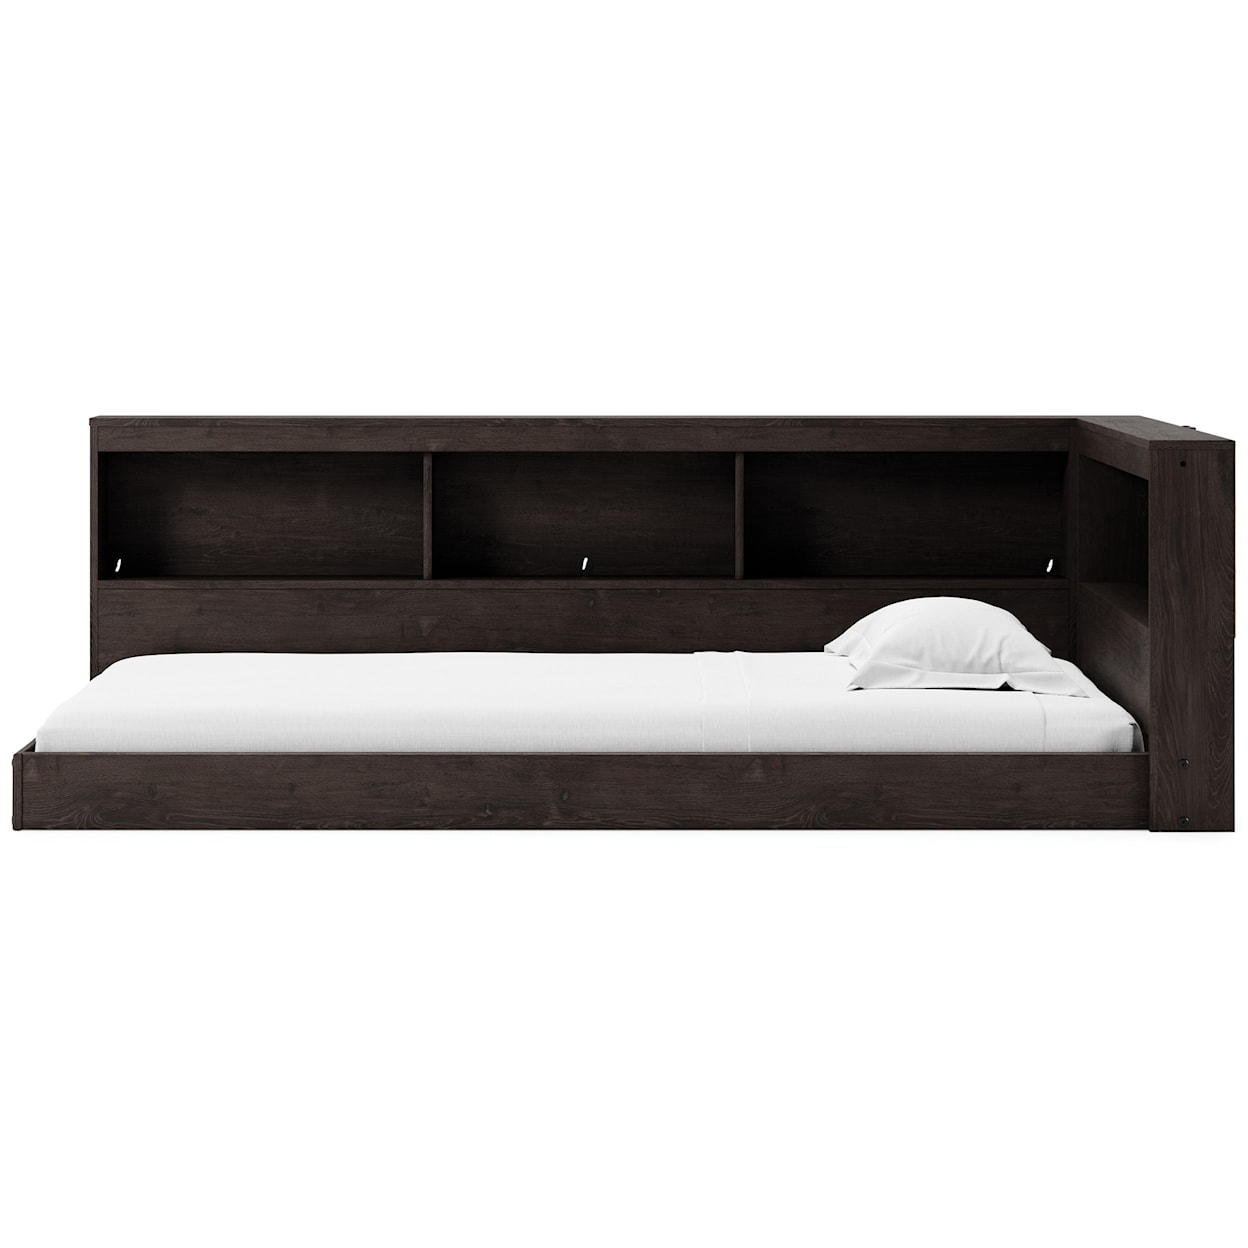 Benchcraft Piperton Twin Bookcase Storage Bed